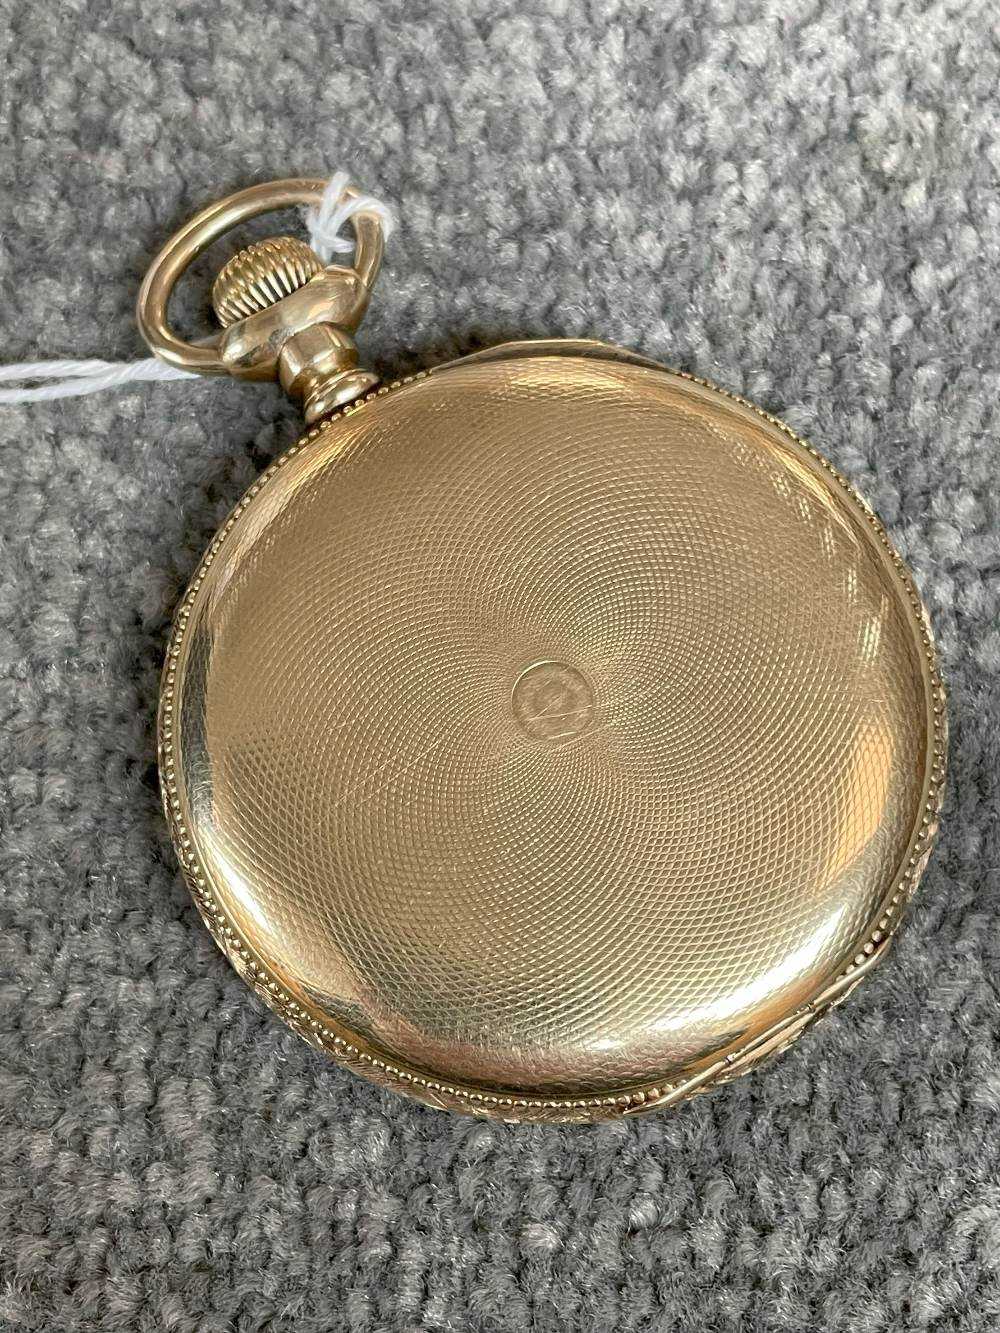 14CT GOLD AMERICAN FULL HUNTER POCKET WATCH, top wind, stepped Roman & Arabic white enamel dial - Image 2 of 14